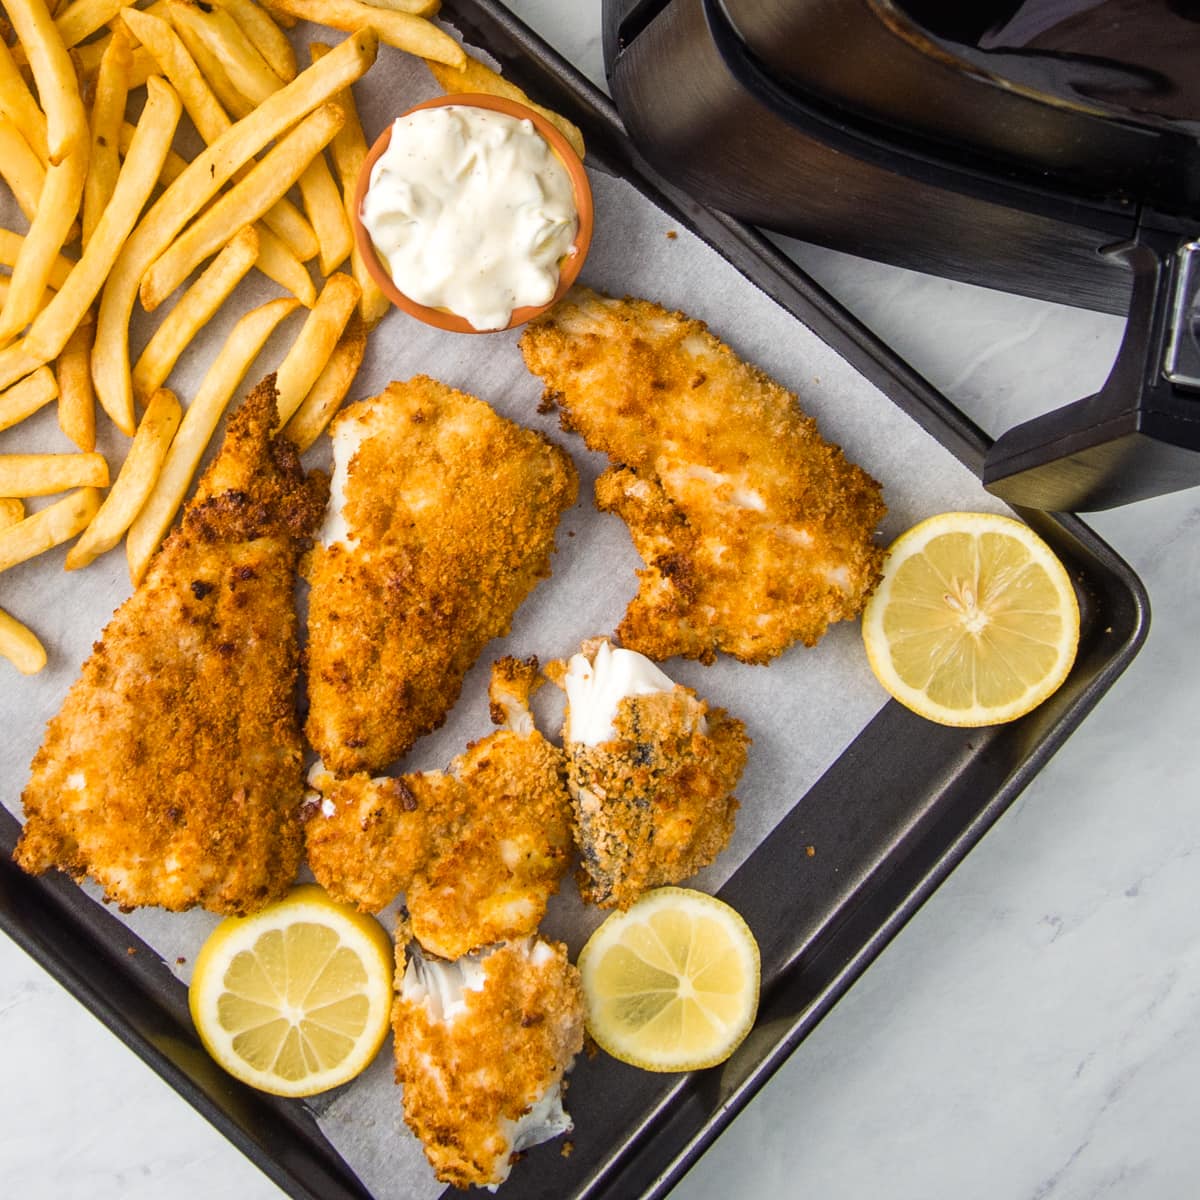 Make Friday Fish Fry In The Air Fryer